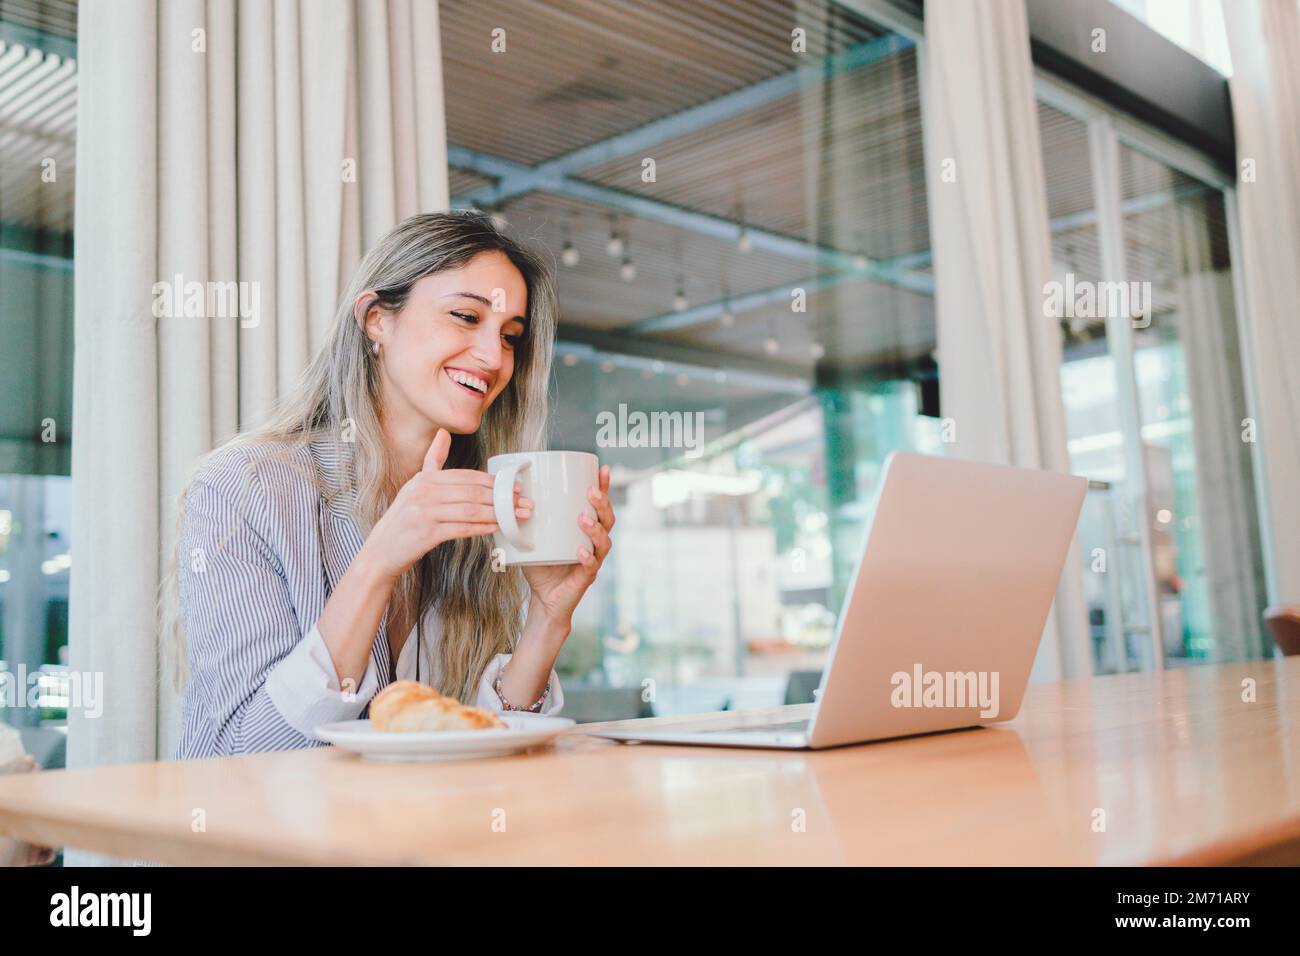 Young woman having a good time, using her laptop, drinking coffee from a mug. Habits to fight depression  Stock Photo